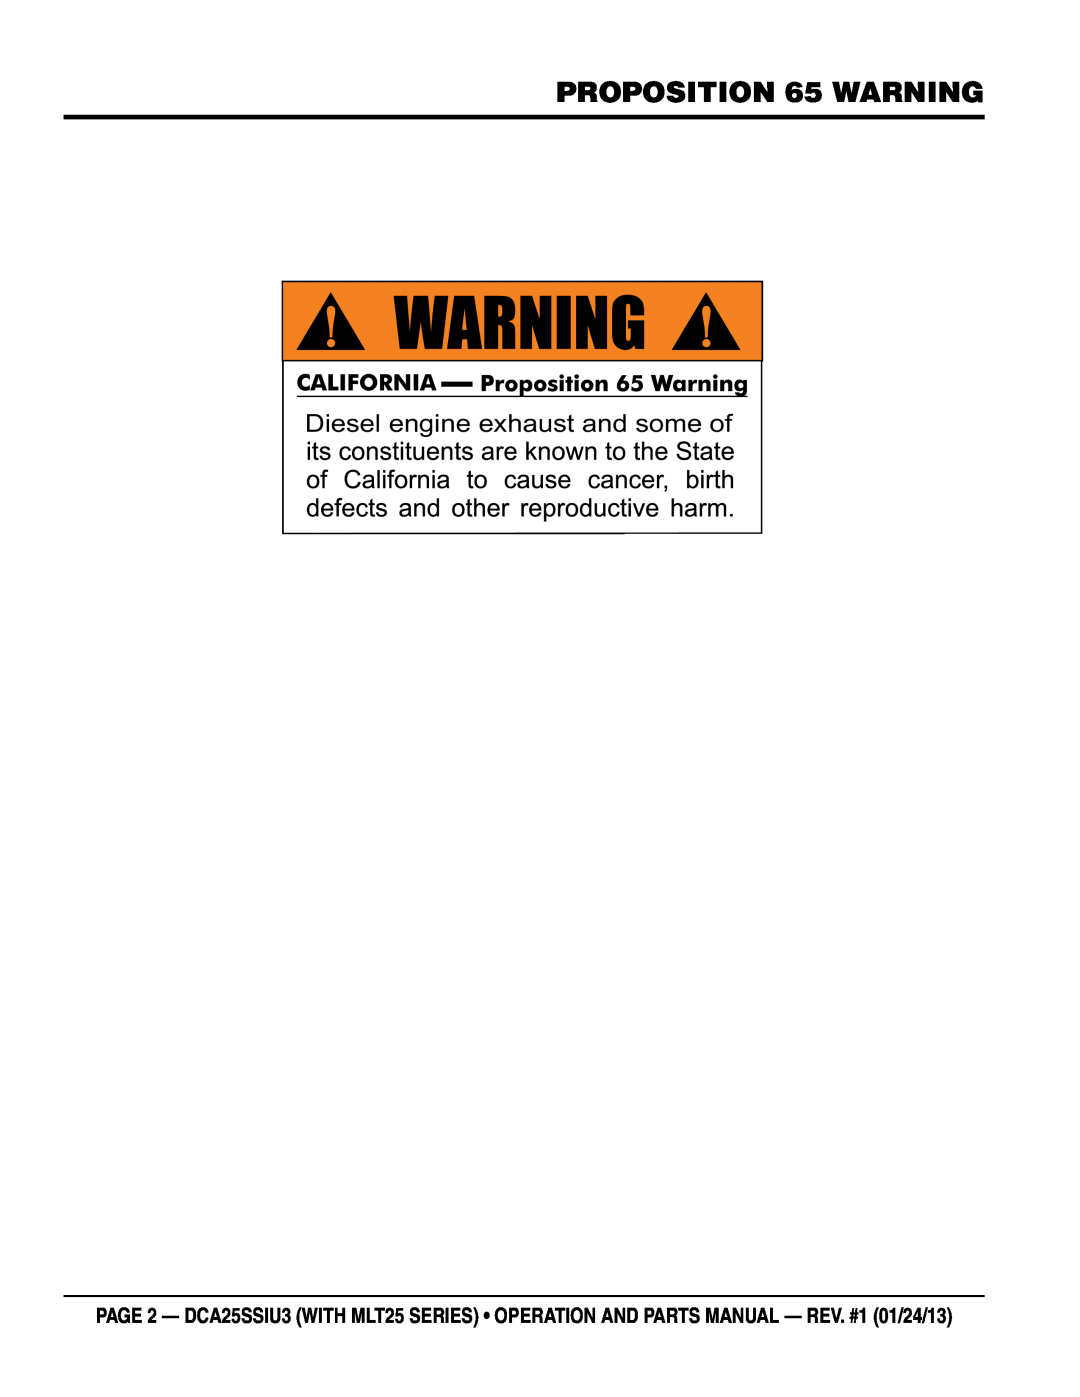 Multiquip dca25ssiu3 manual proposition 65 warning, Diesel engine exhaust and some of 